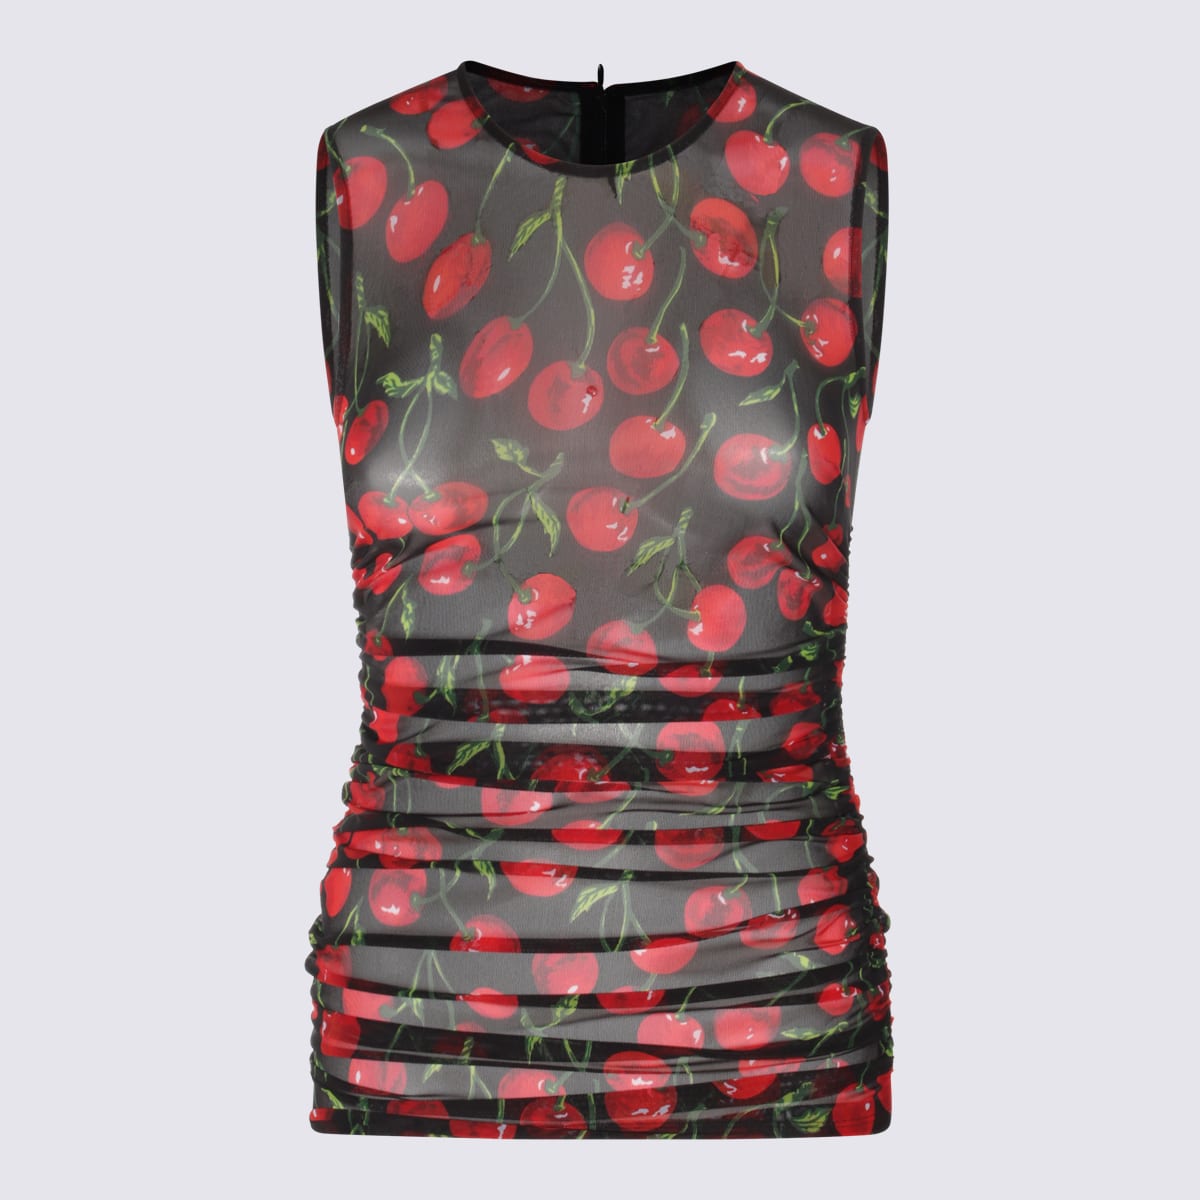 DOLCE & GABBANA BLACK, RED AND GREEN TOP